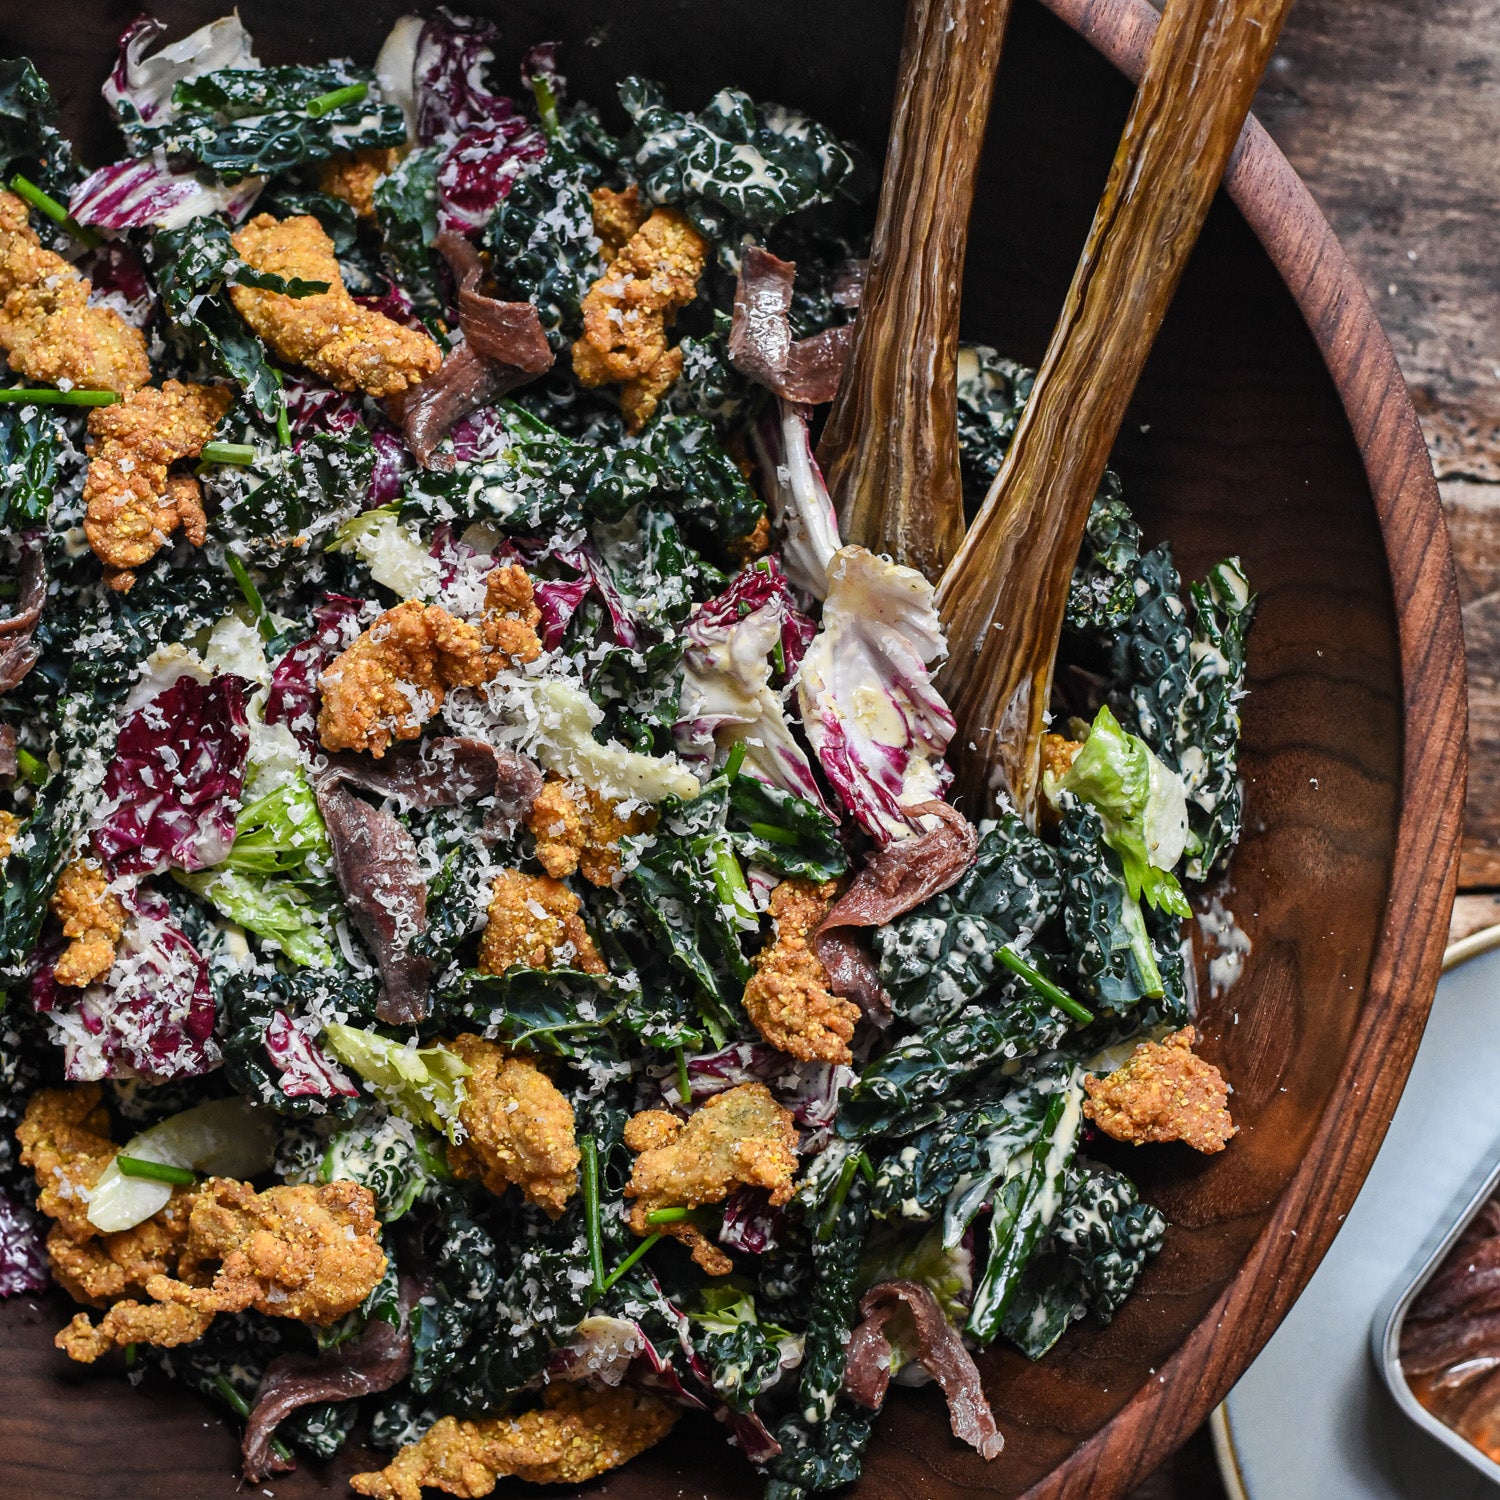 Recipe:  Kale Salad with Fried Oyster Croutons